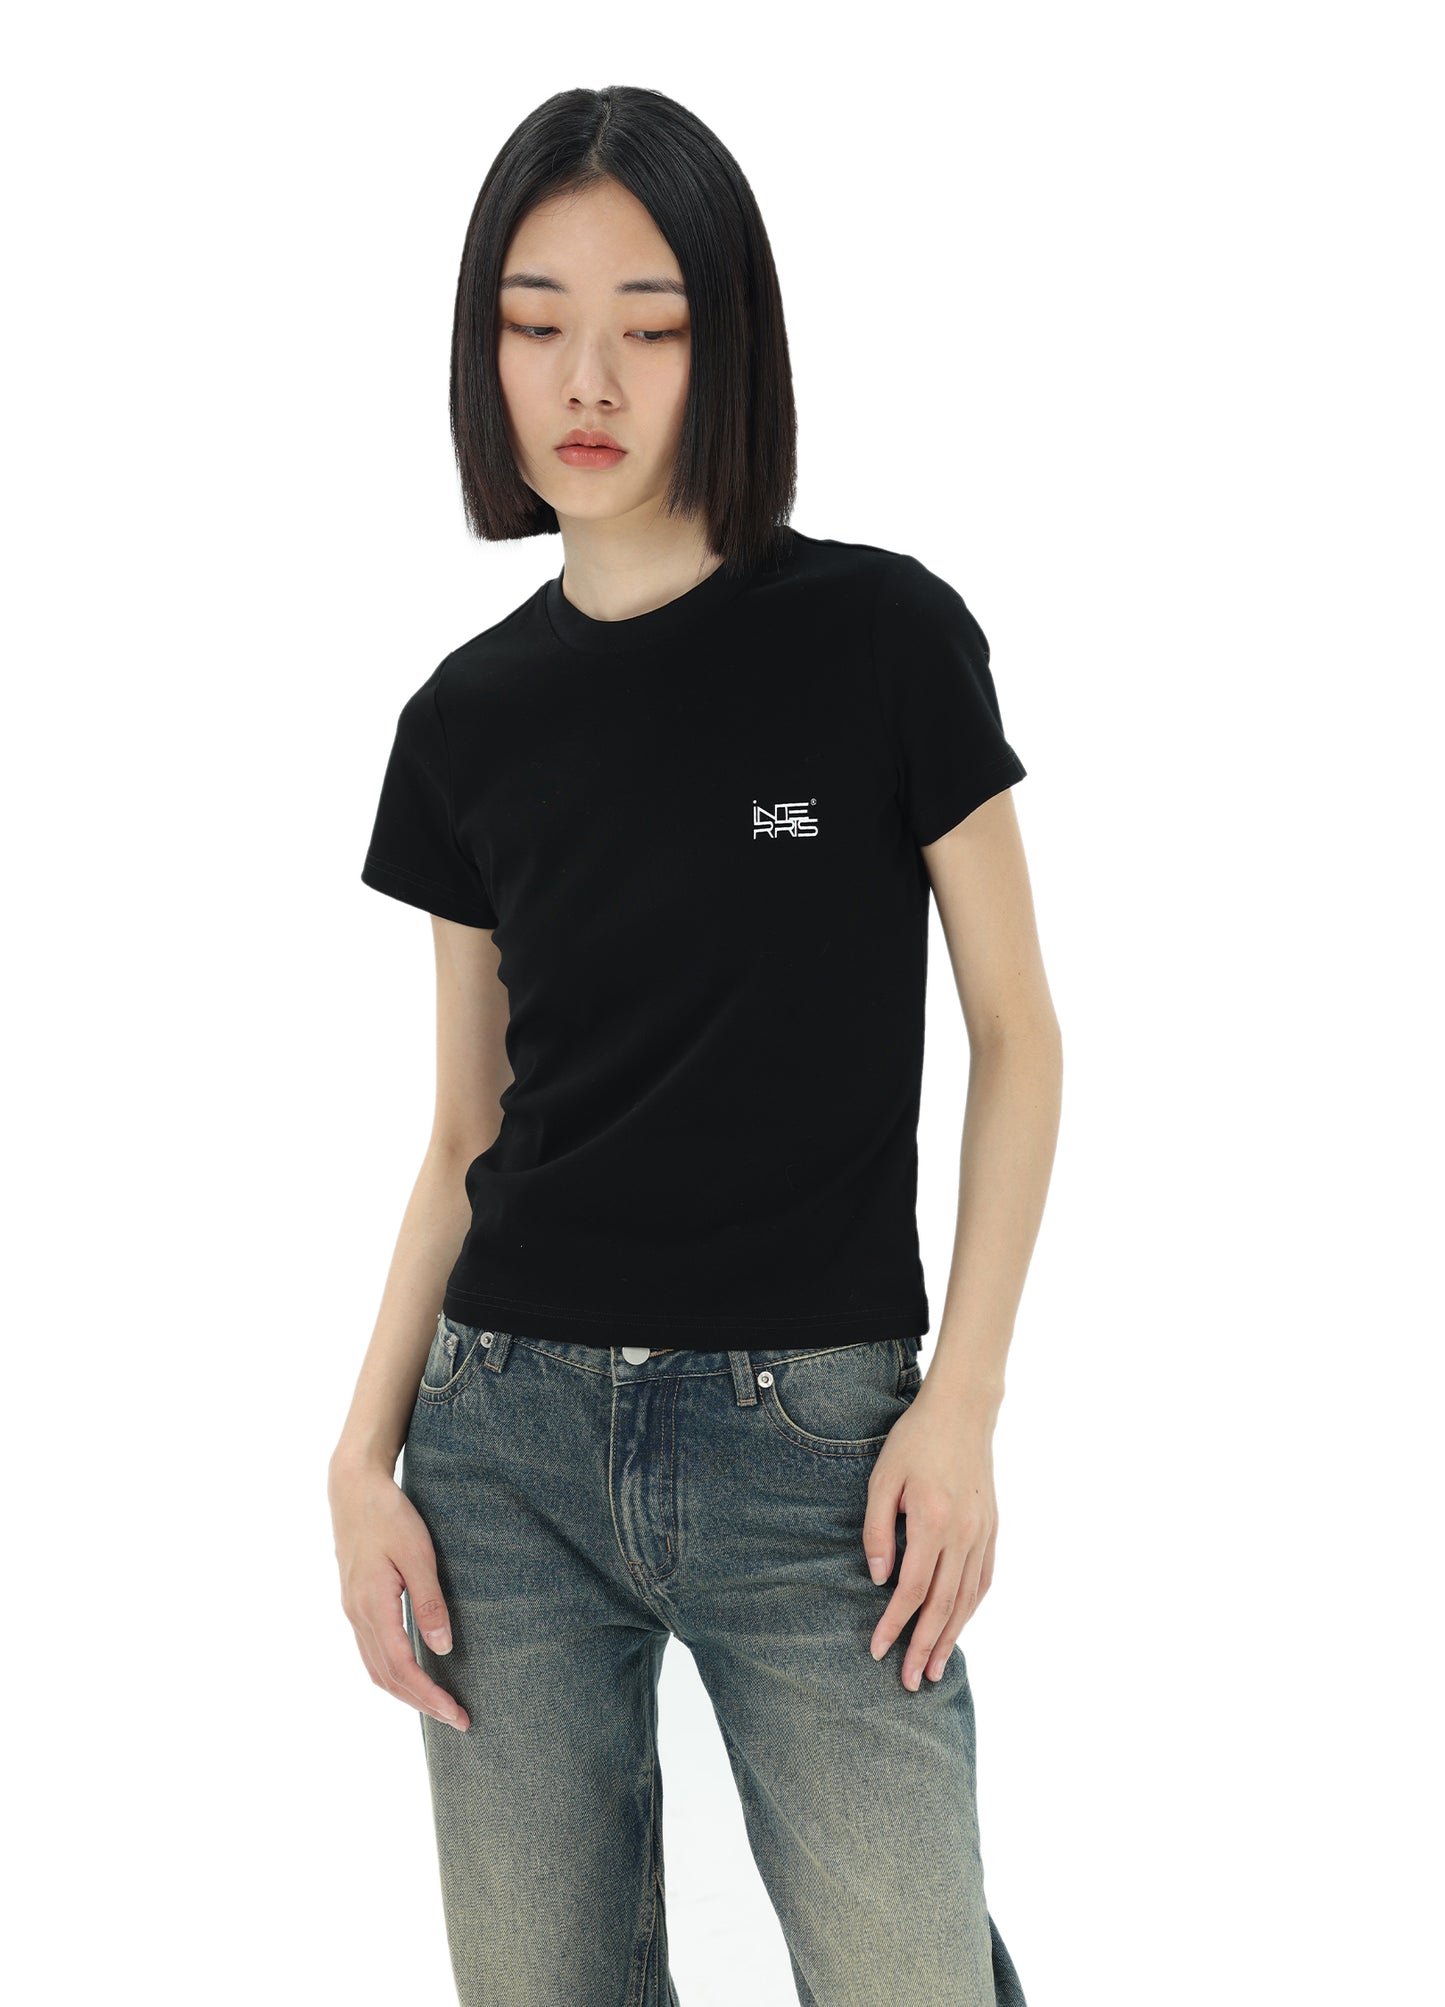 Fitted logo tee Womens